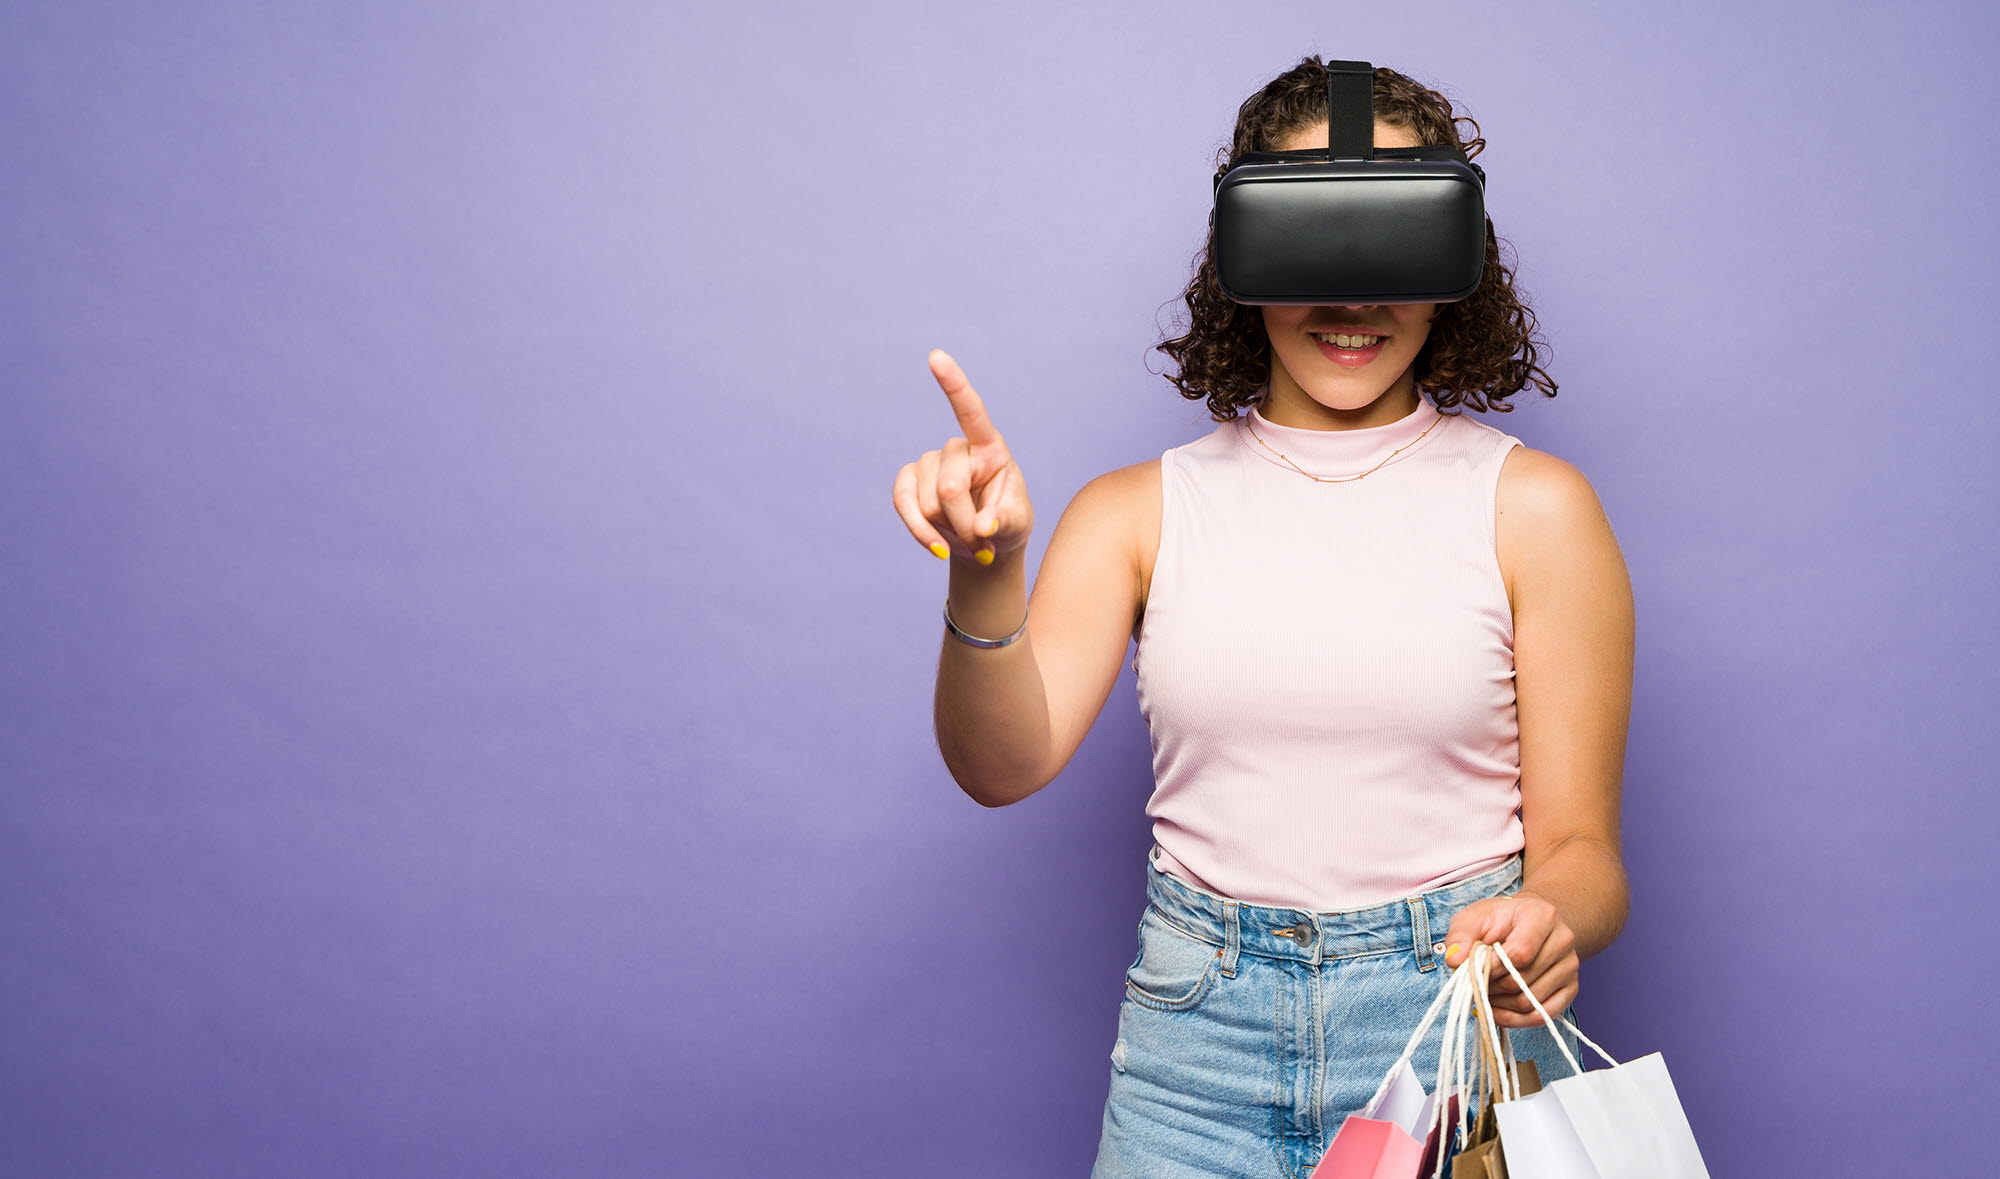 Virtual shopping with VR headset